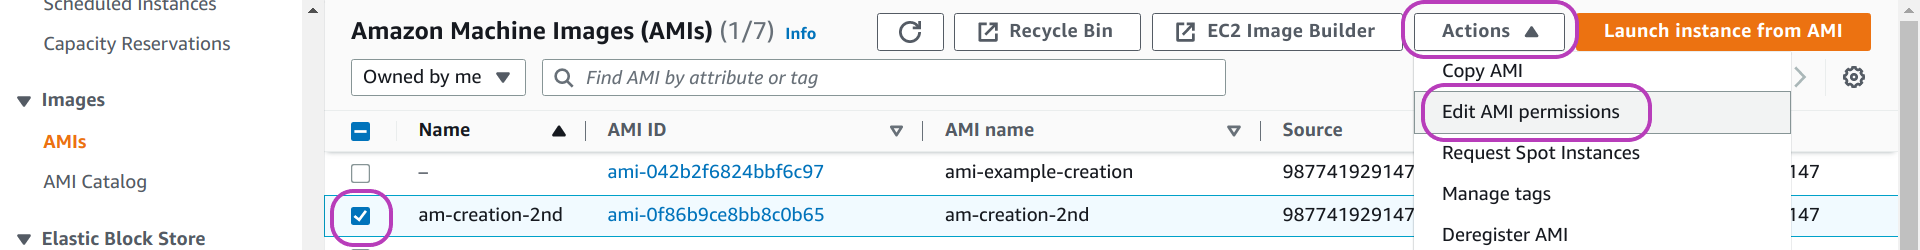 Screenshot of AWS Console "Amazon Machine Images (AMIs)" page in a browser, showing the following items circled: the checkbox to the left of an AMI name checked, the "Actions" drop-down menu at the top, and the option "Edit AMI permissions" (within the "Actions" menu).